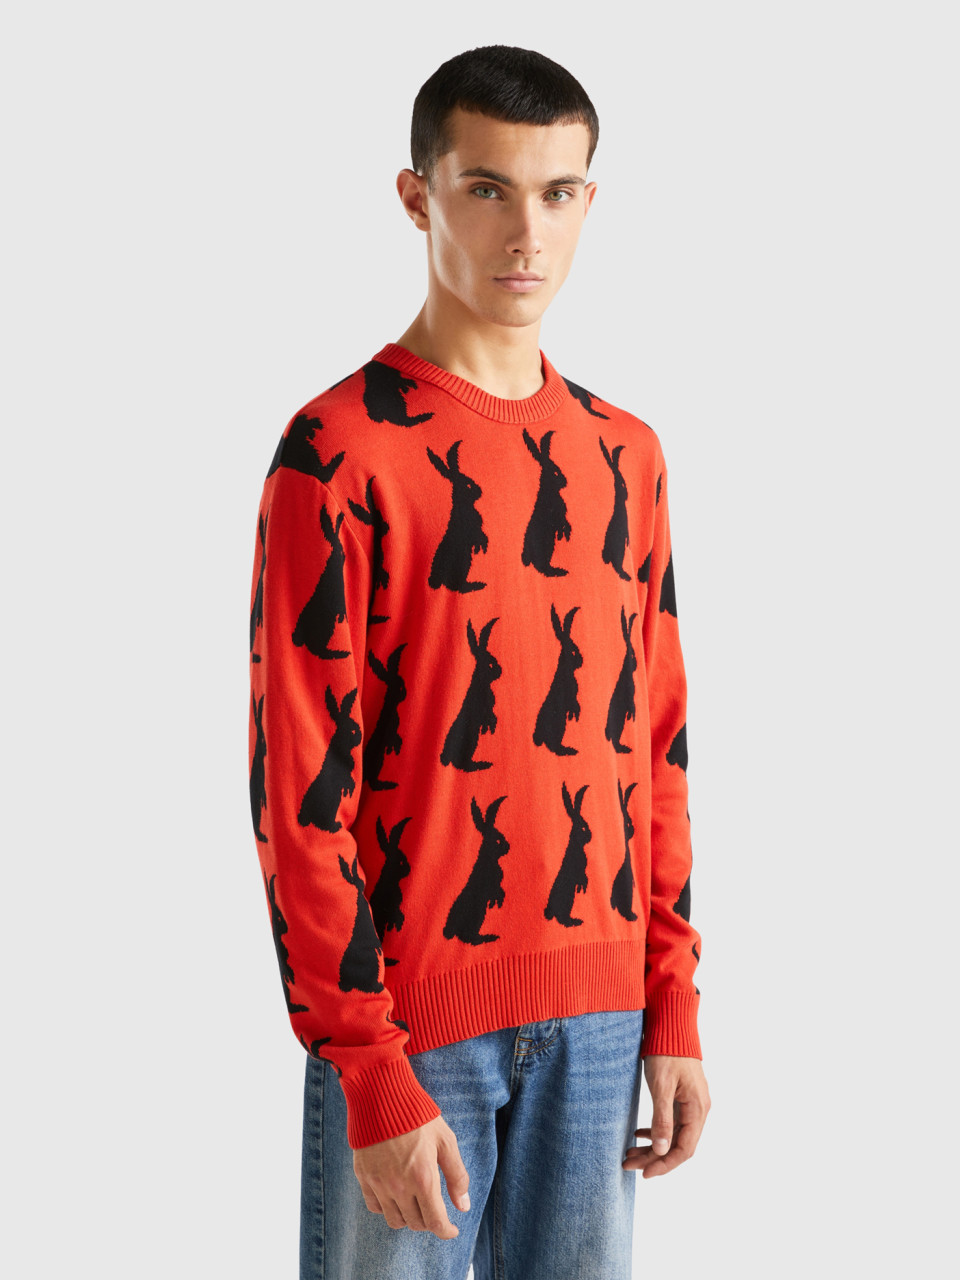 Benetton, Sweater With Bunny Pattern, Red, Men